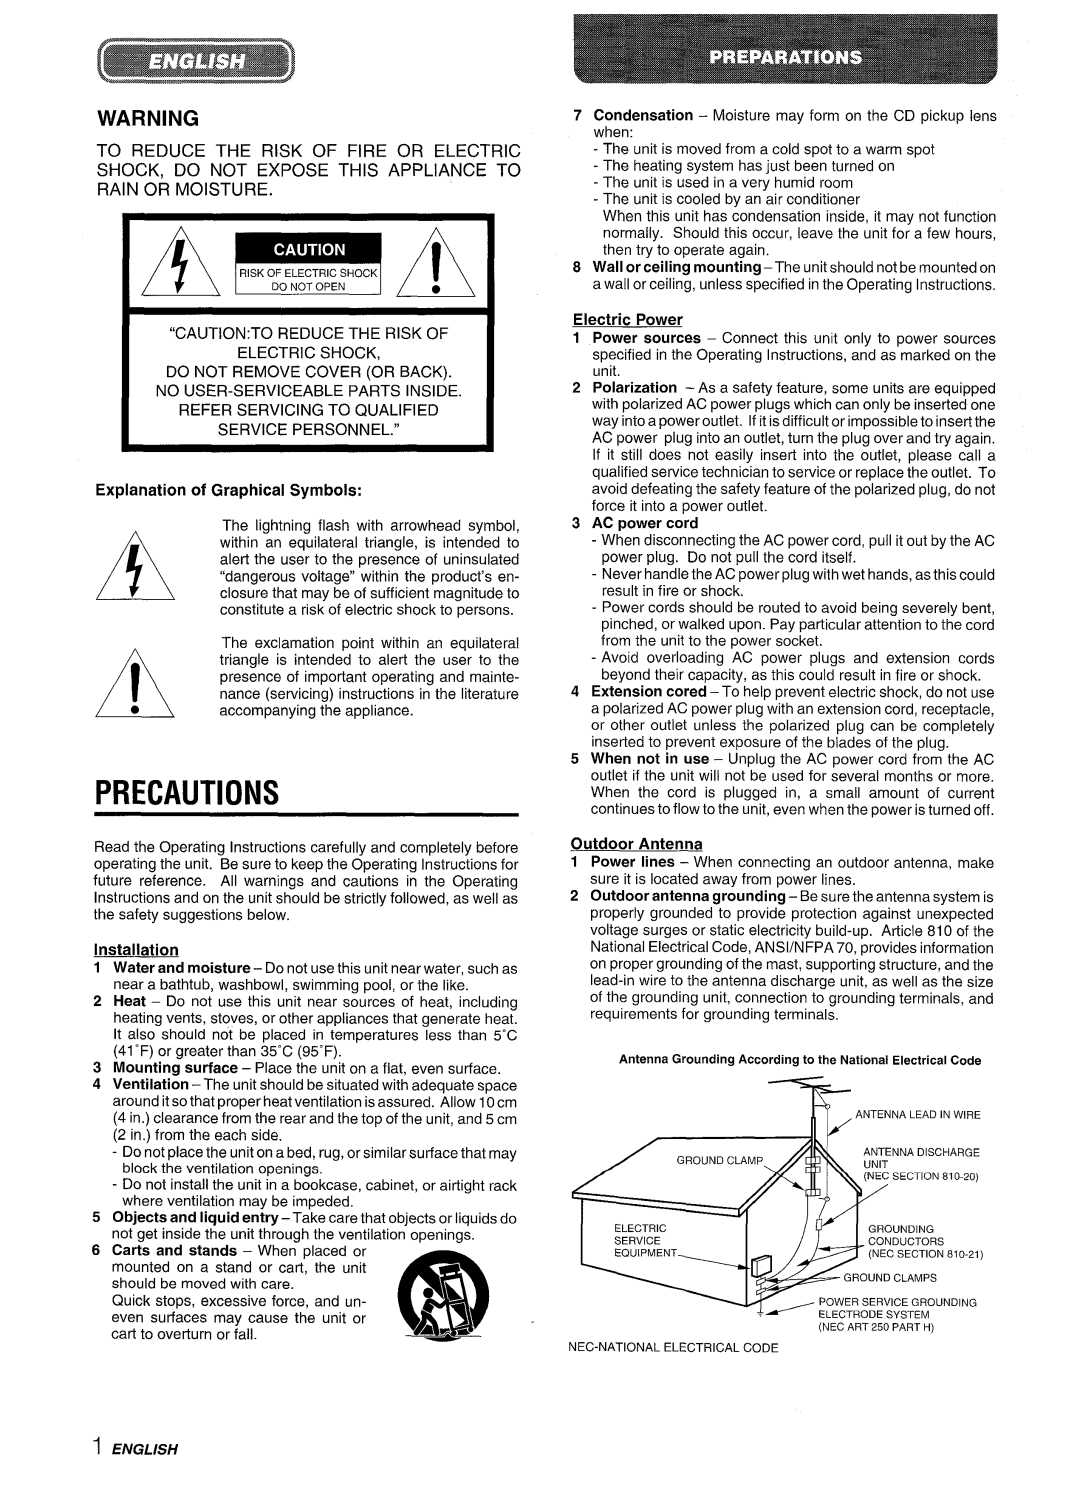 Aiwa XR-M35 A ~, Precautions, To Reduce The Risk Of Fire Or Electric, Shock. Do Not Expose This Appliance To, Installation 